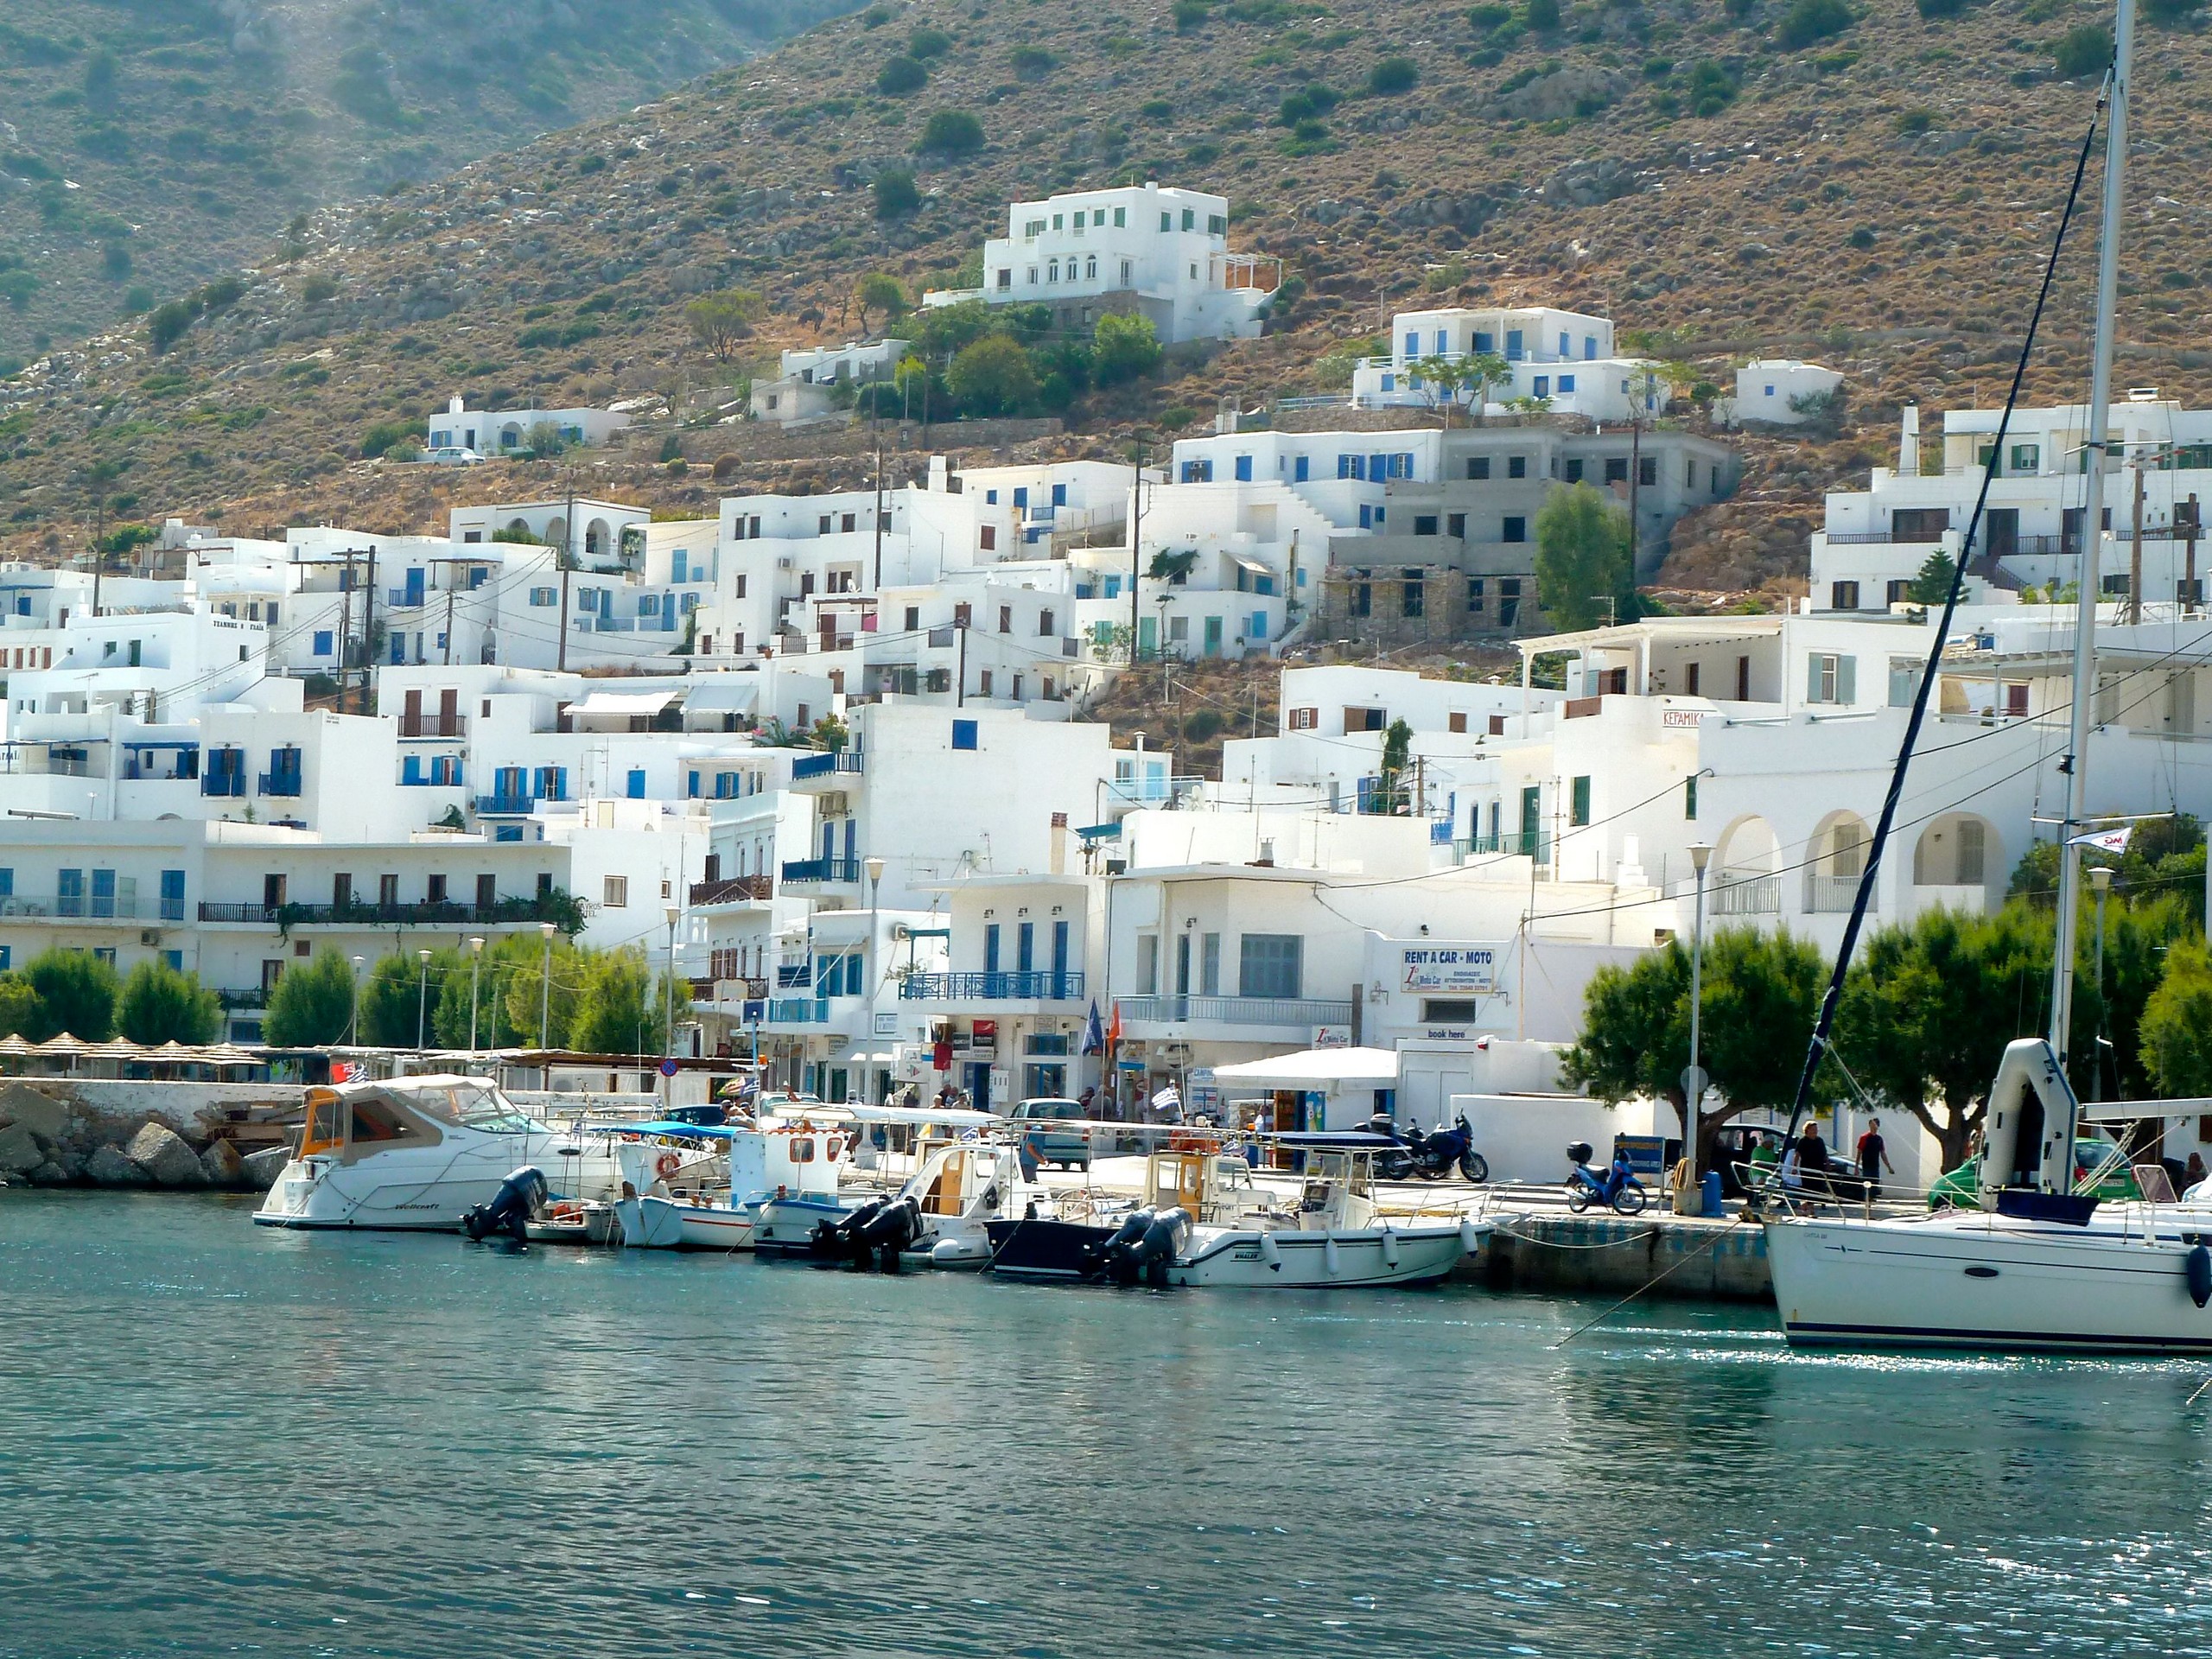 The Kamares harbour, Sifnos